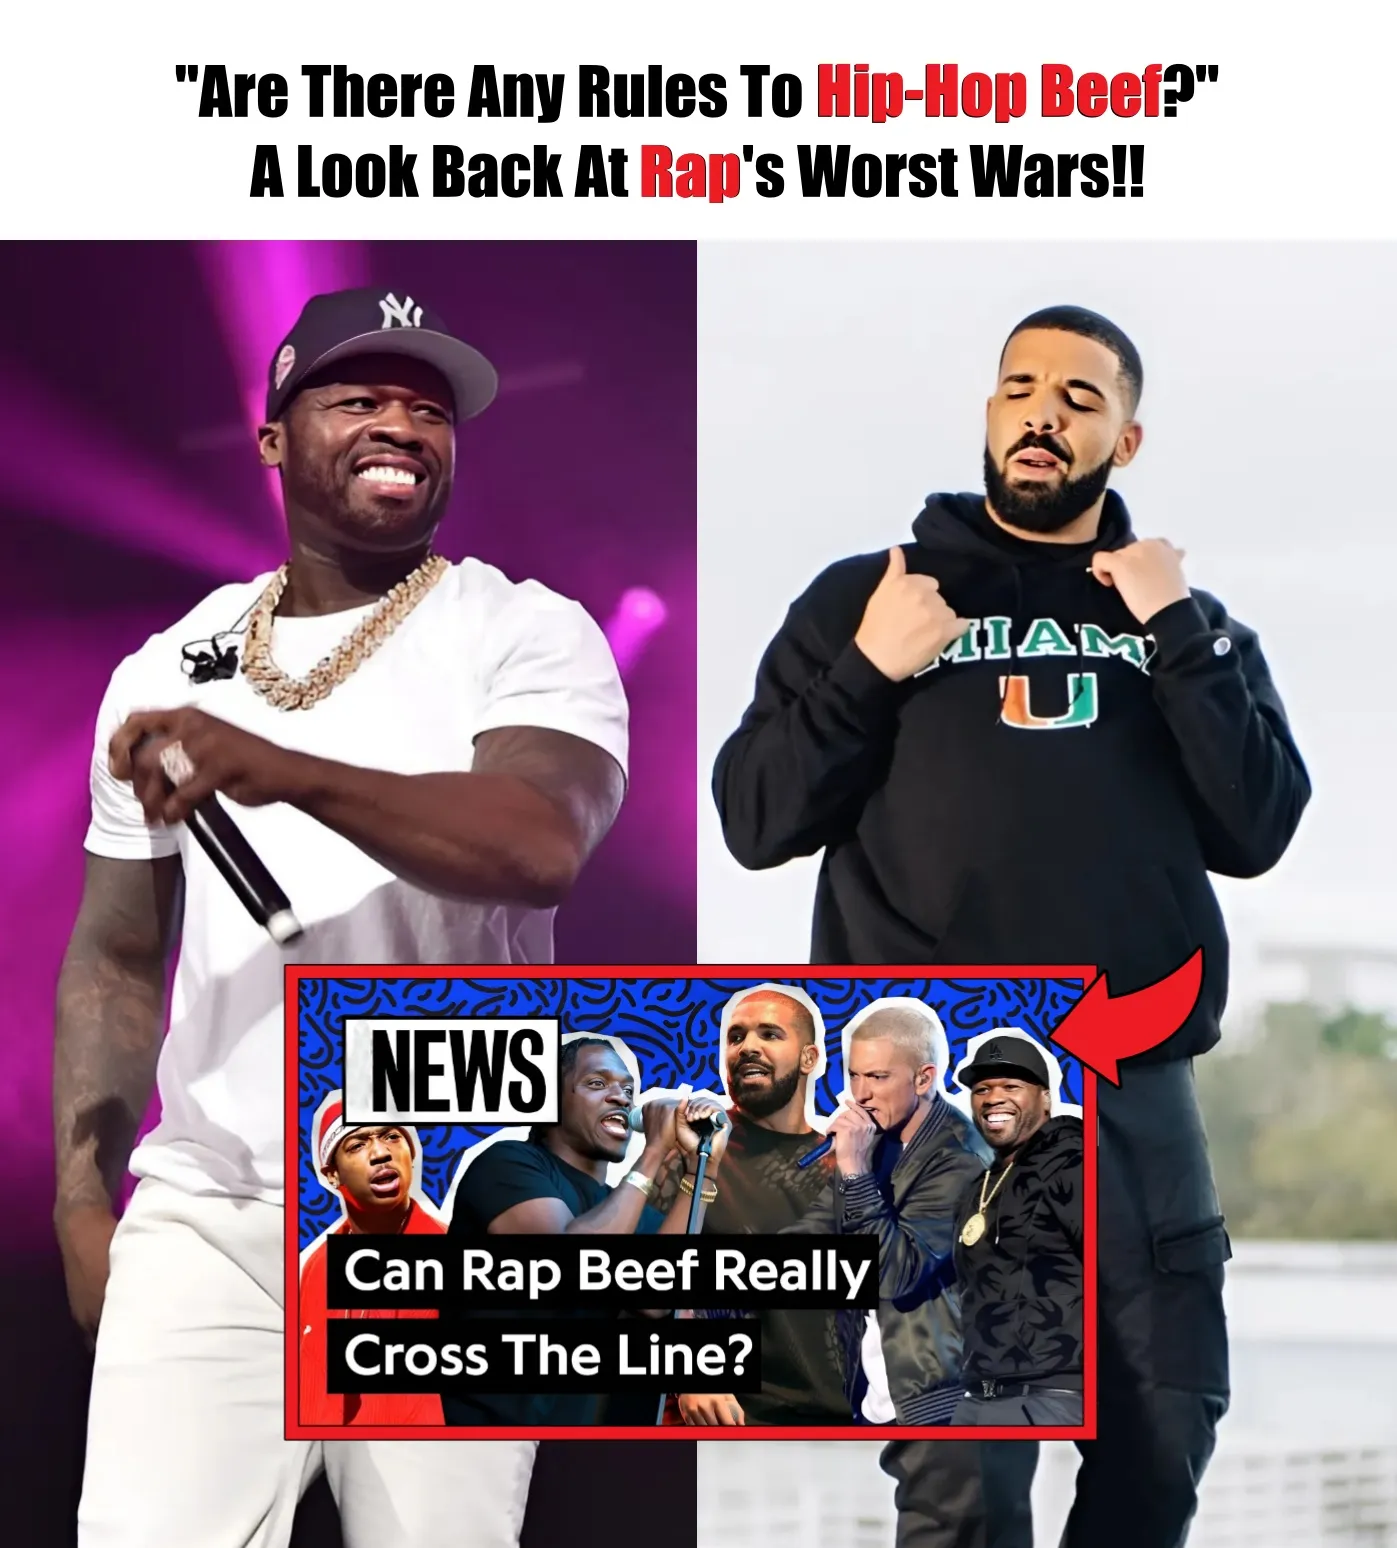 Cover Image for “Are There Any Rules To Hip-Hop Beef?” A Look Back At Rap’s Worst Wars!!